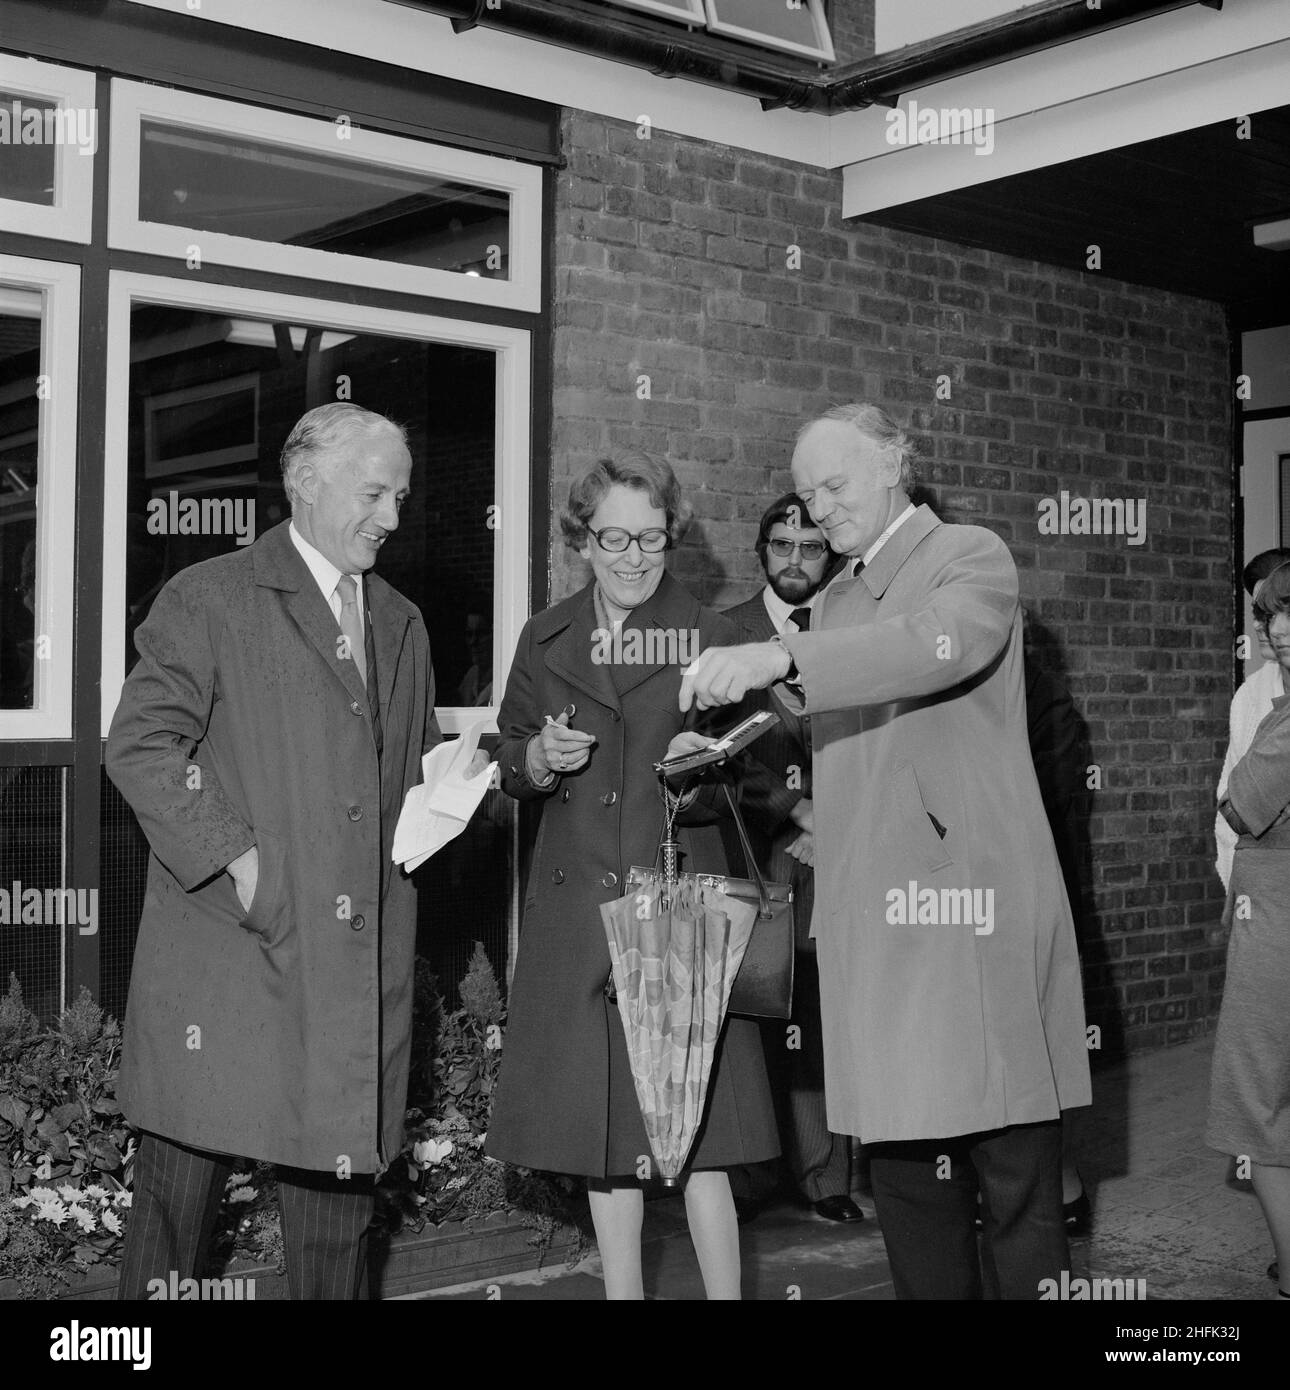 Farriers Hall Community Centre, Farriers Way, Borehamwood, Elstree and Borehamwood, Hertsmere, Hertfordshire, 20/10/1978. F Bryer, Director of Laing's Building Division, presenting Councillor J Tatham with the key to the old people's club on the Furzehill Road housing development. Laing began work on the Furzehill road contract in March 1976. 395 houses and flats would accommodate around 1,400 people. The site was a former 'Home of Rest for Horses,' giving rise to street names like Farriers Way. The contract became an unofficial training ground for apprentices and the old people's club was bui Stock Photo